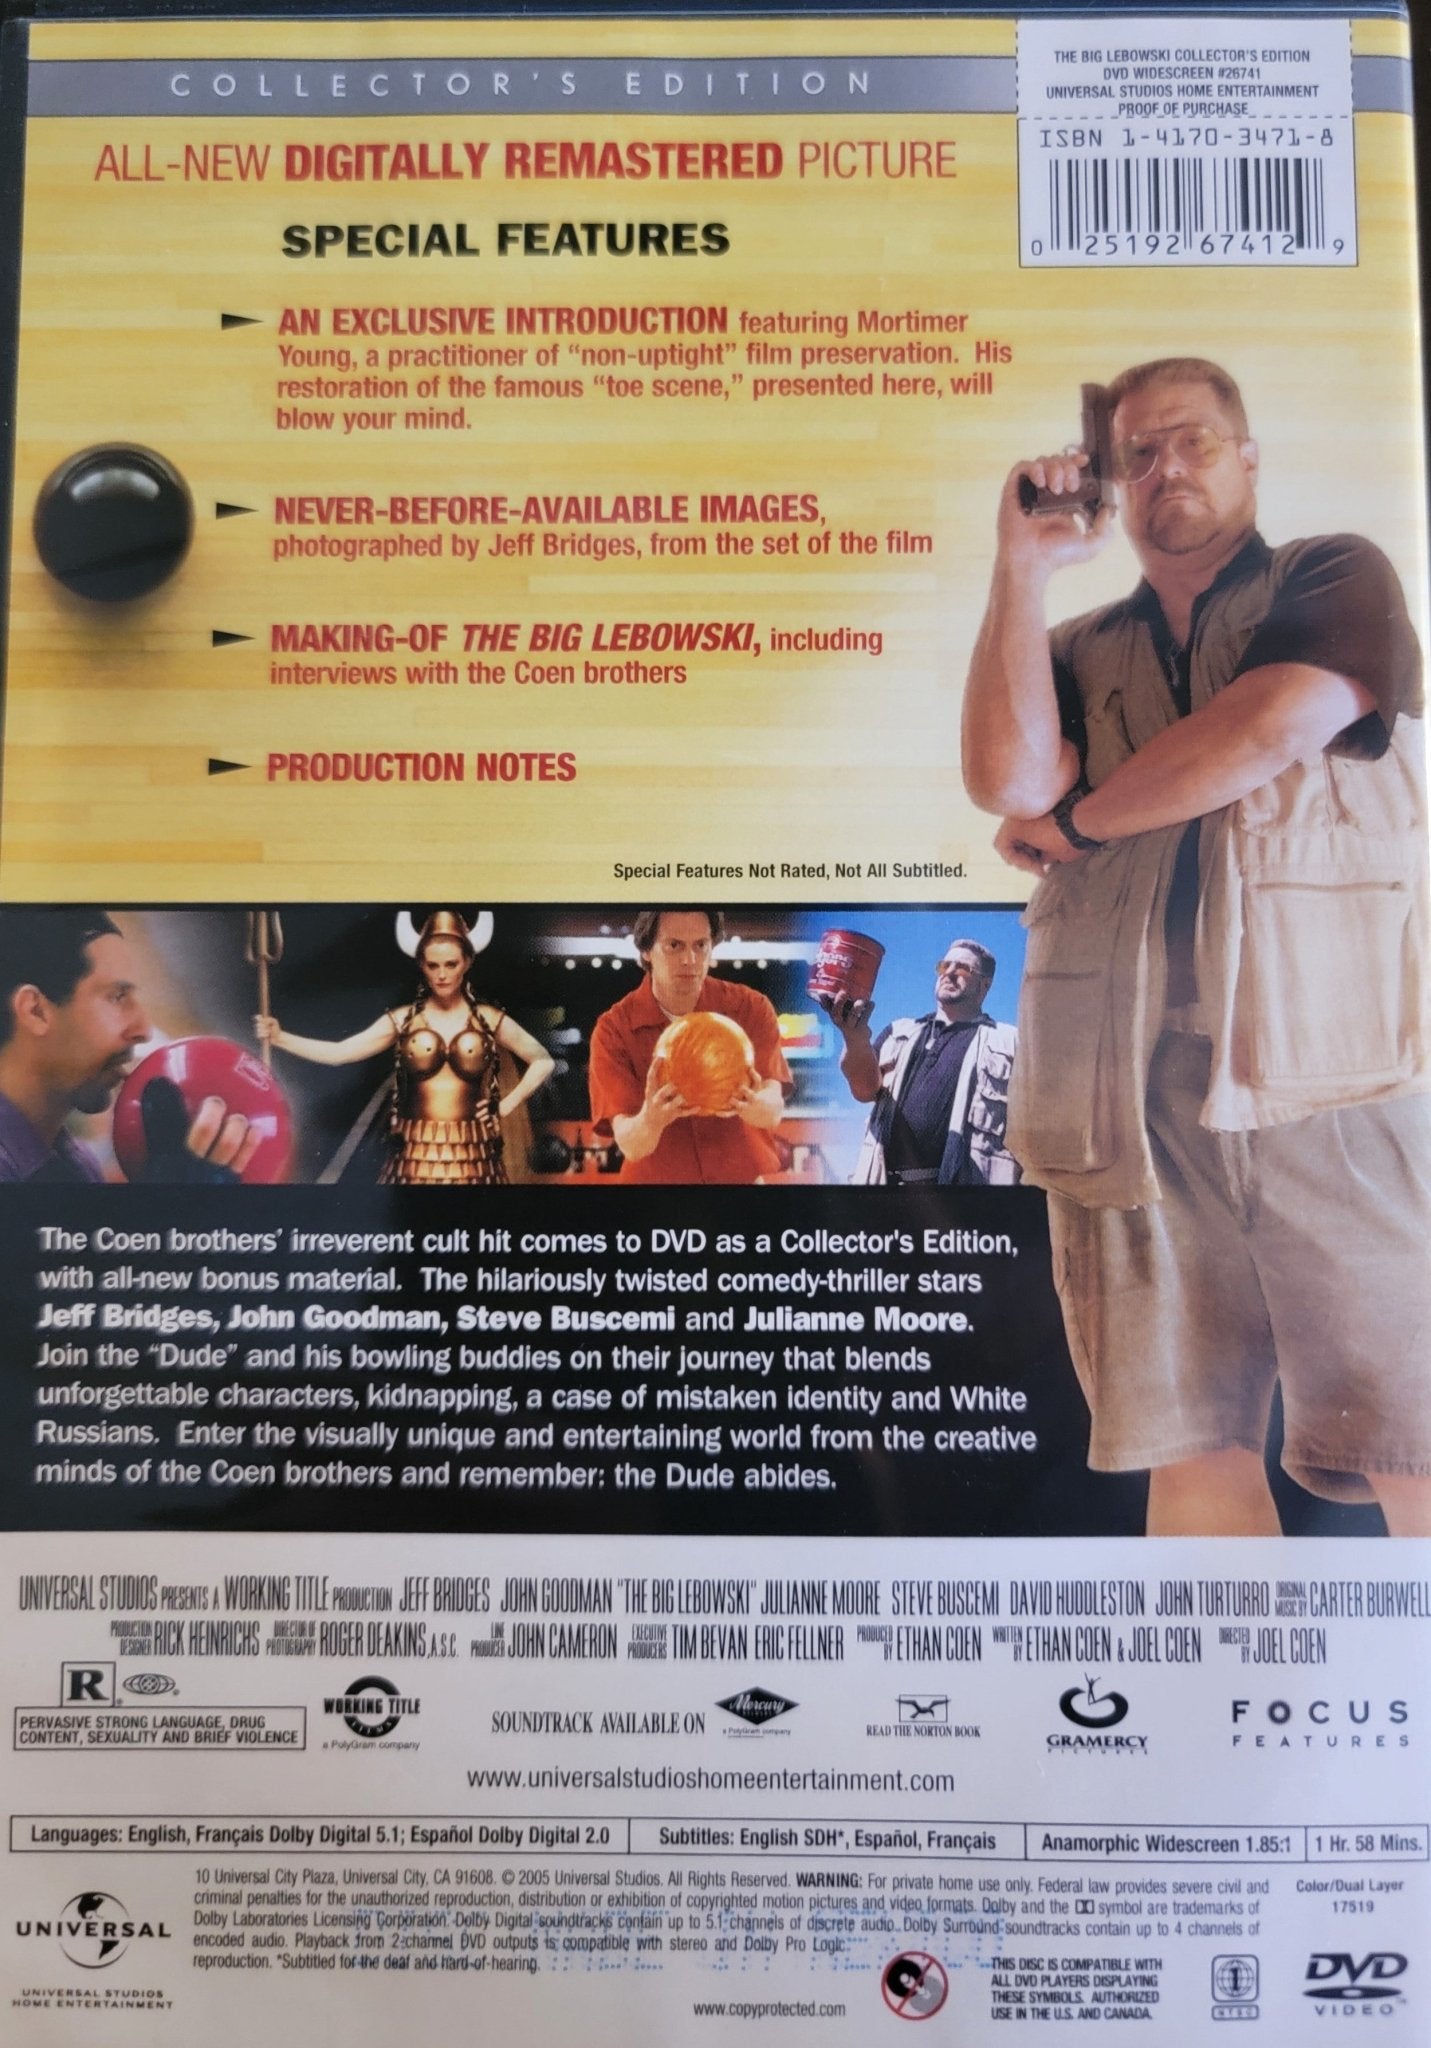 Universal Pictures Home Entertainment - The Big Lebowski | DVD | Collector's Edition Widescreen - Steady Bunny Shop